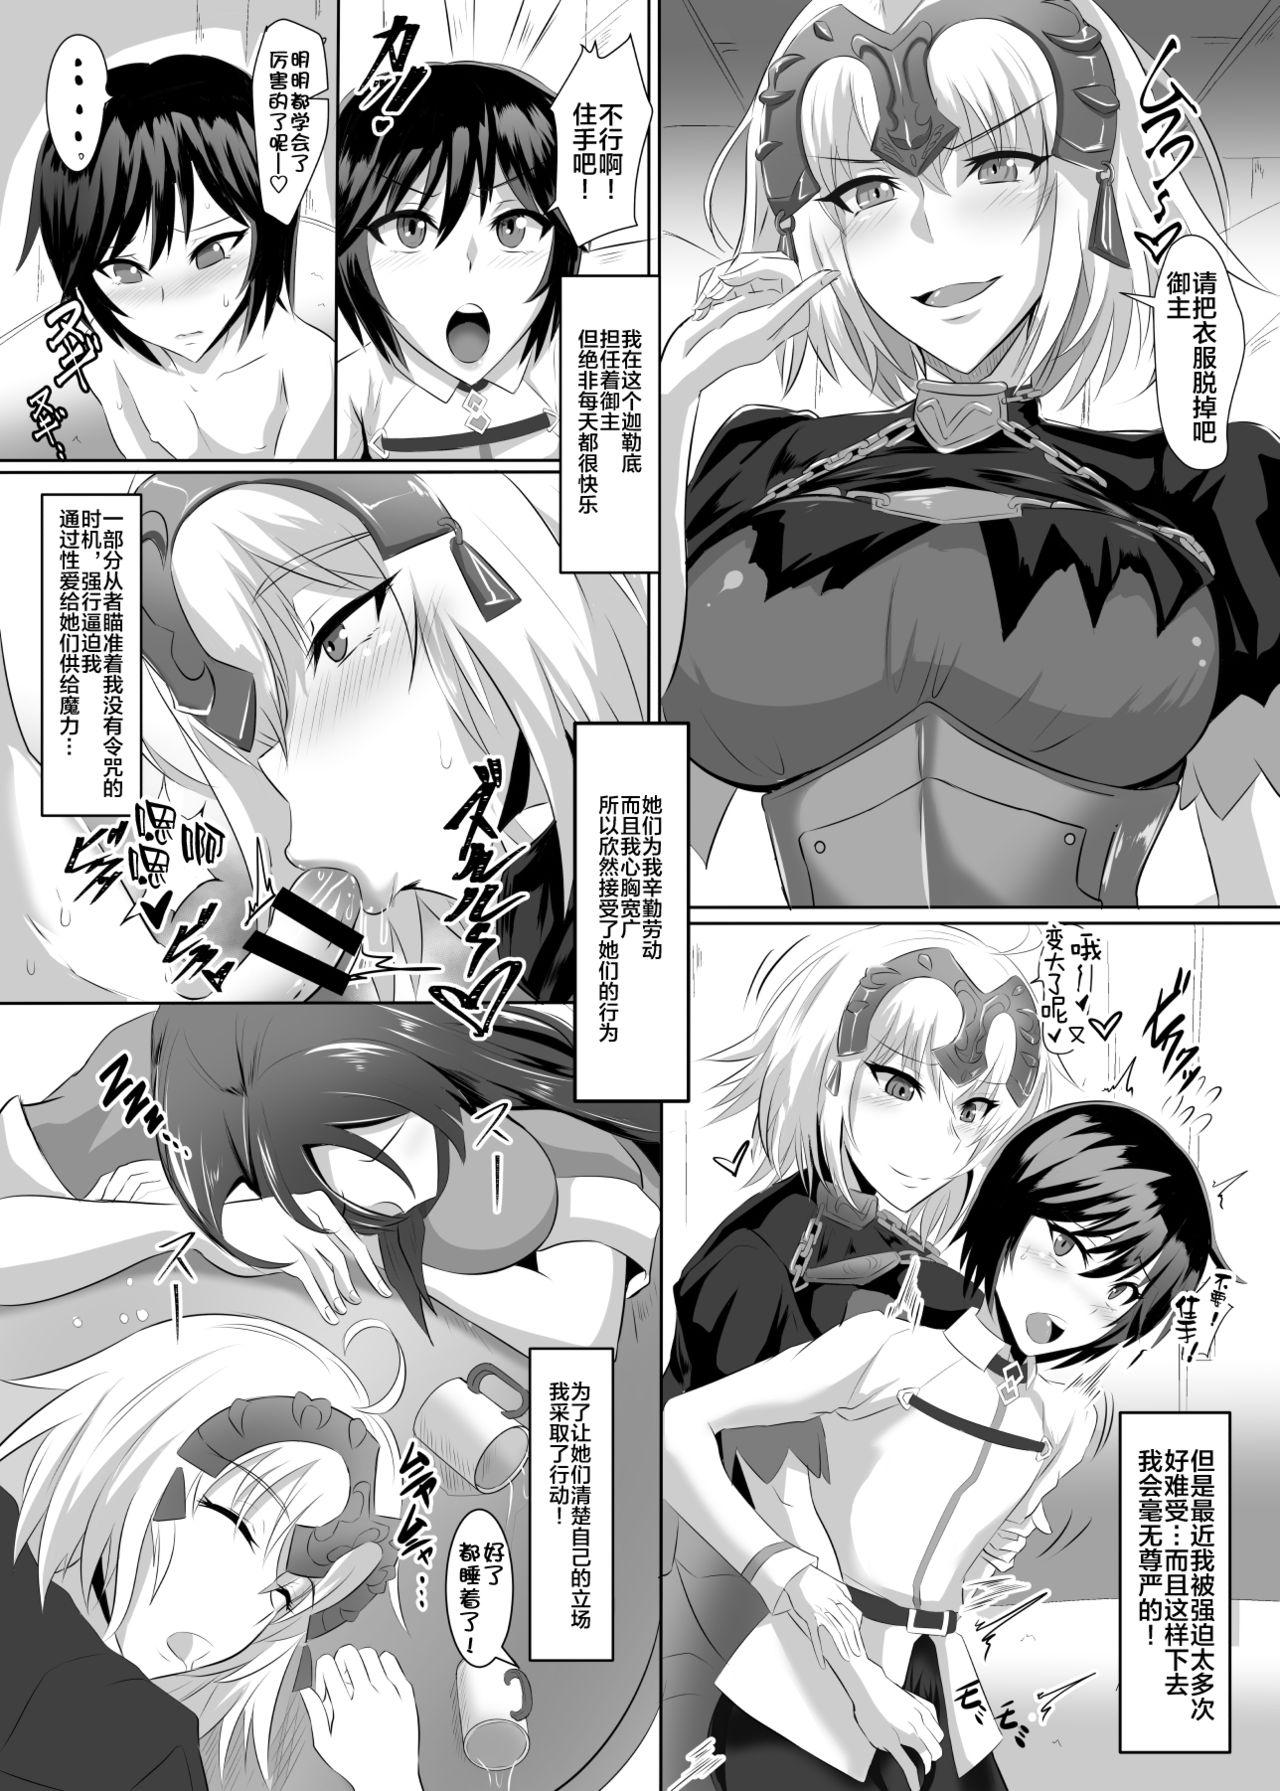 Licking Pussy Gehenna 7 - Fate grand order Africa - Page 4